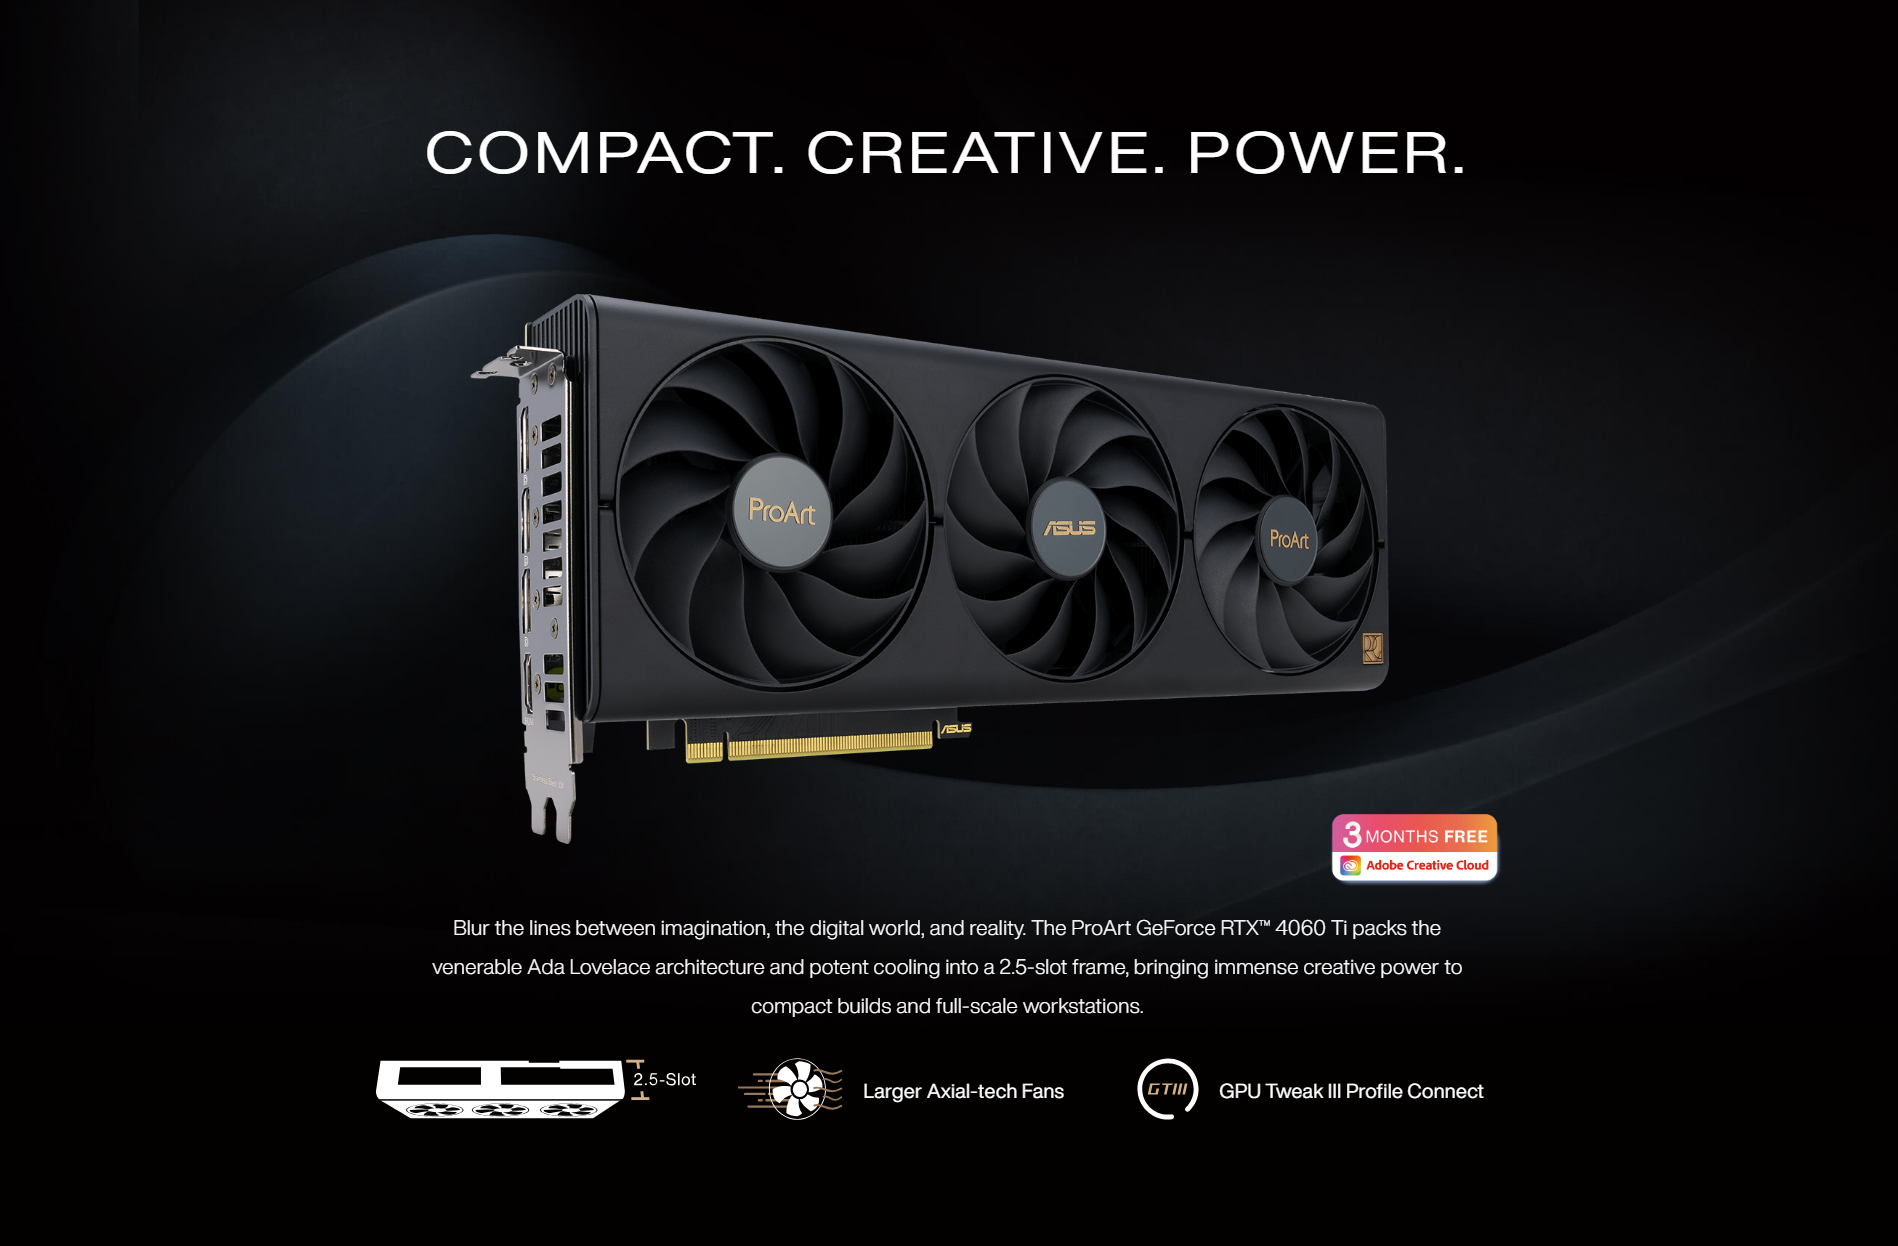 A large marketing image providing additional information about the product ASUS GeForce RTX 4060 Ti ProArt OC 16GB GDDR6 - Additional alt info not provided